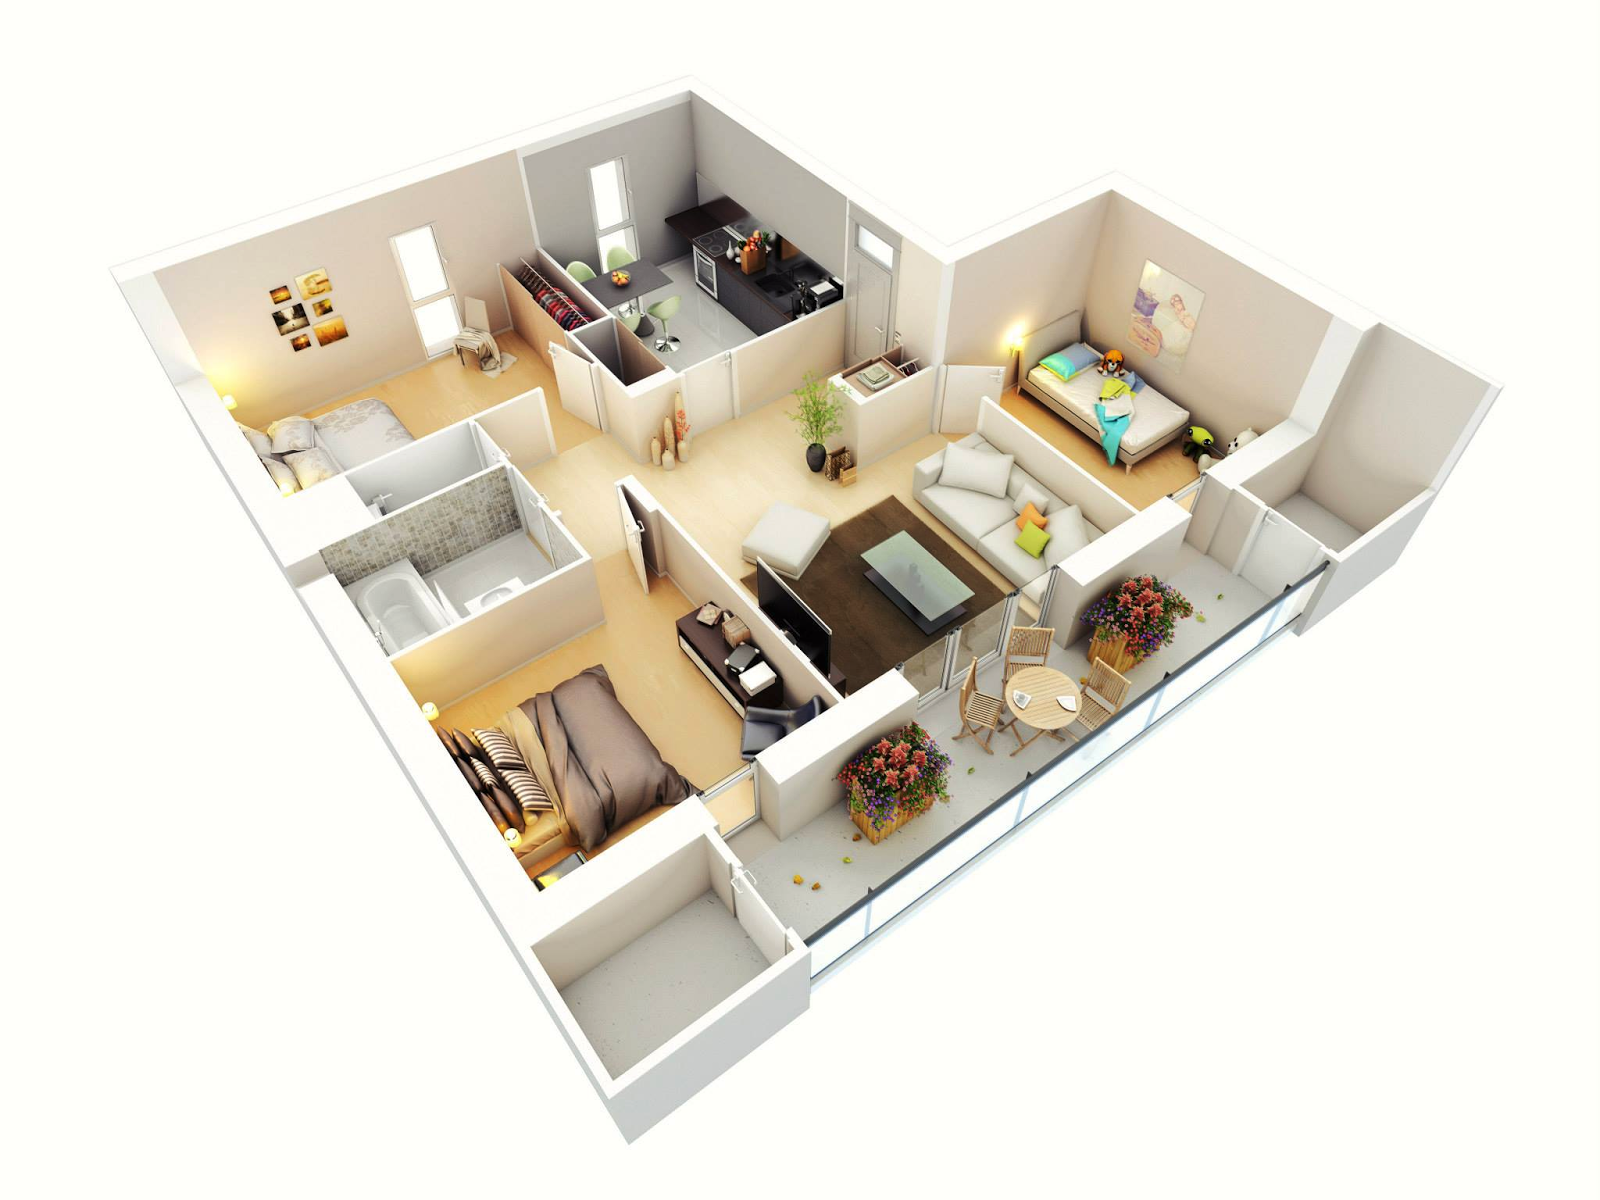 FREE 3 BEDROOMS HOUSE DESIGN AND LAY-OUT  